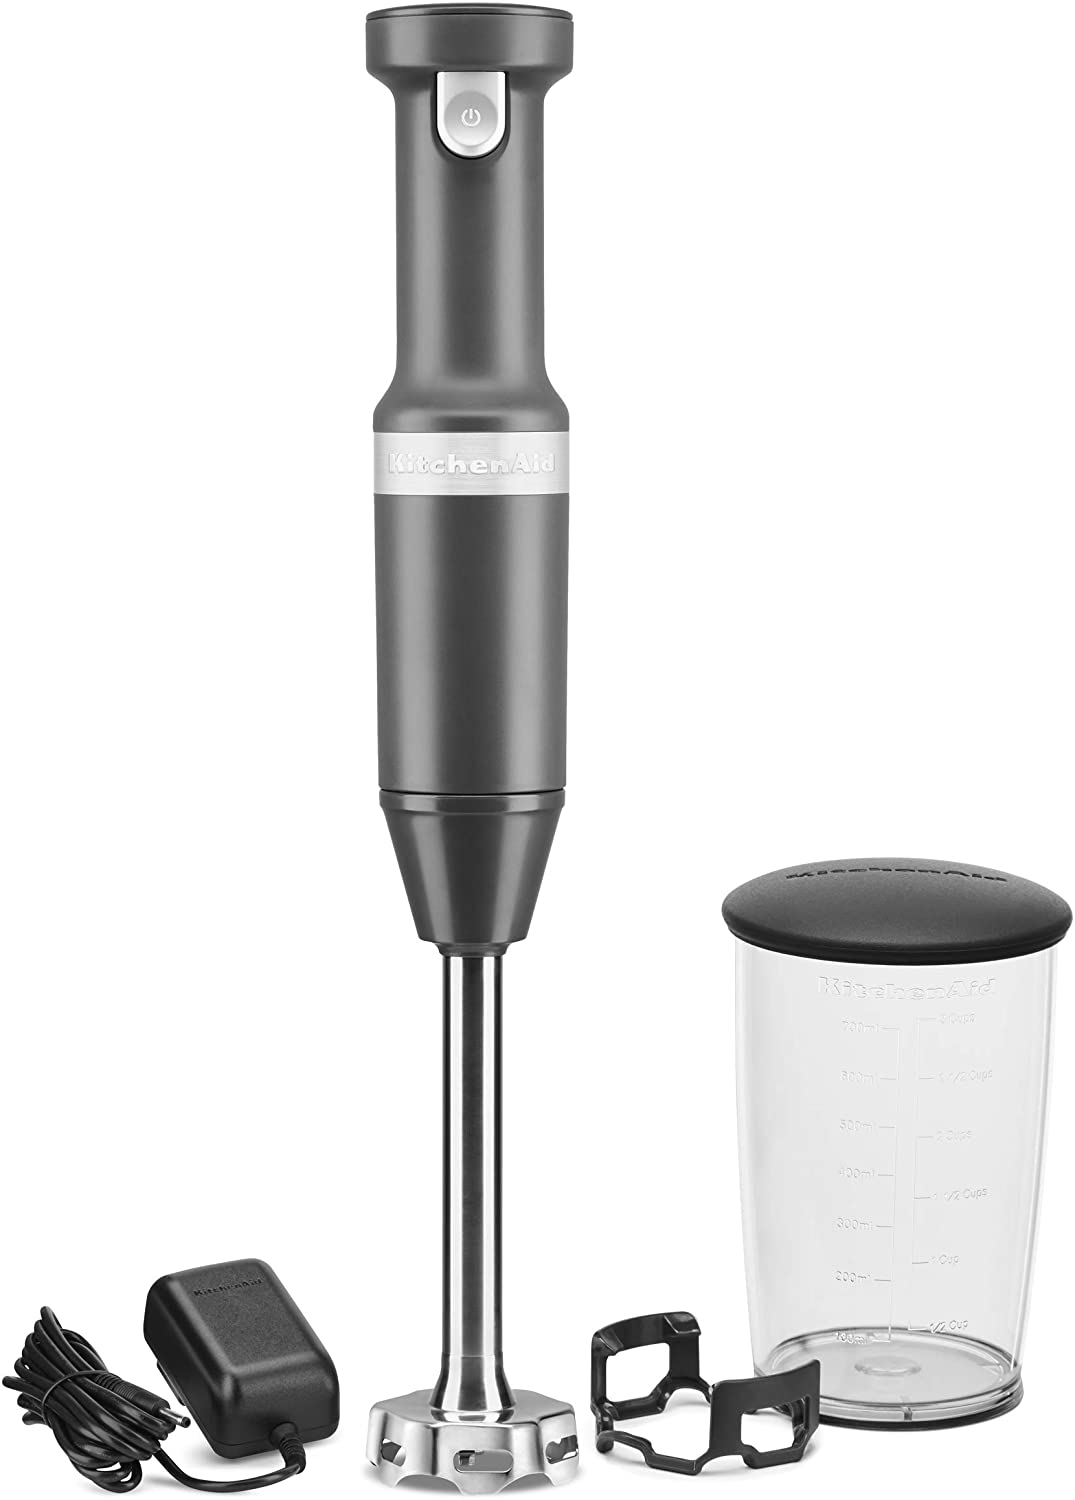 10 handy kitchen gadgets that make holiday cooking and baking easier: KitchenAid cordless immersion blender | Amazon